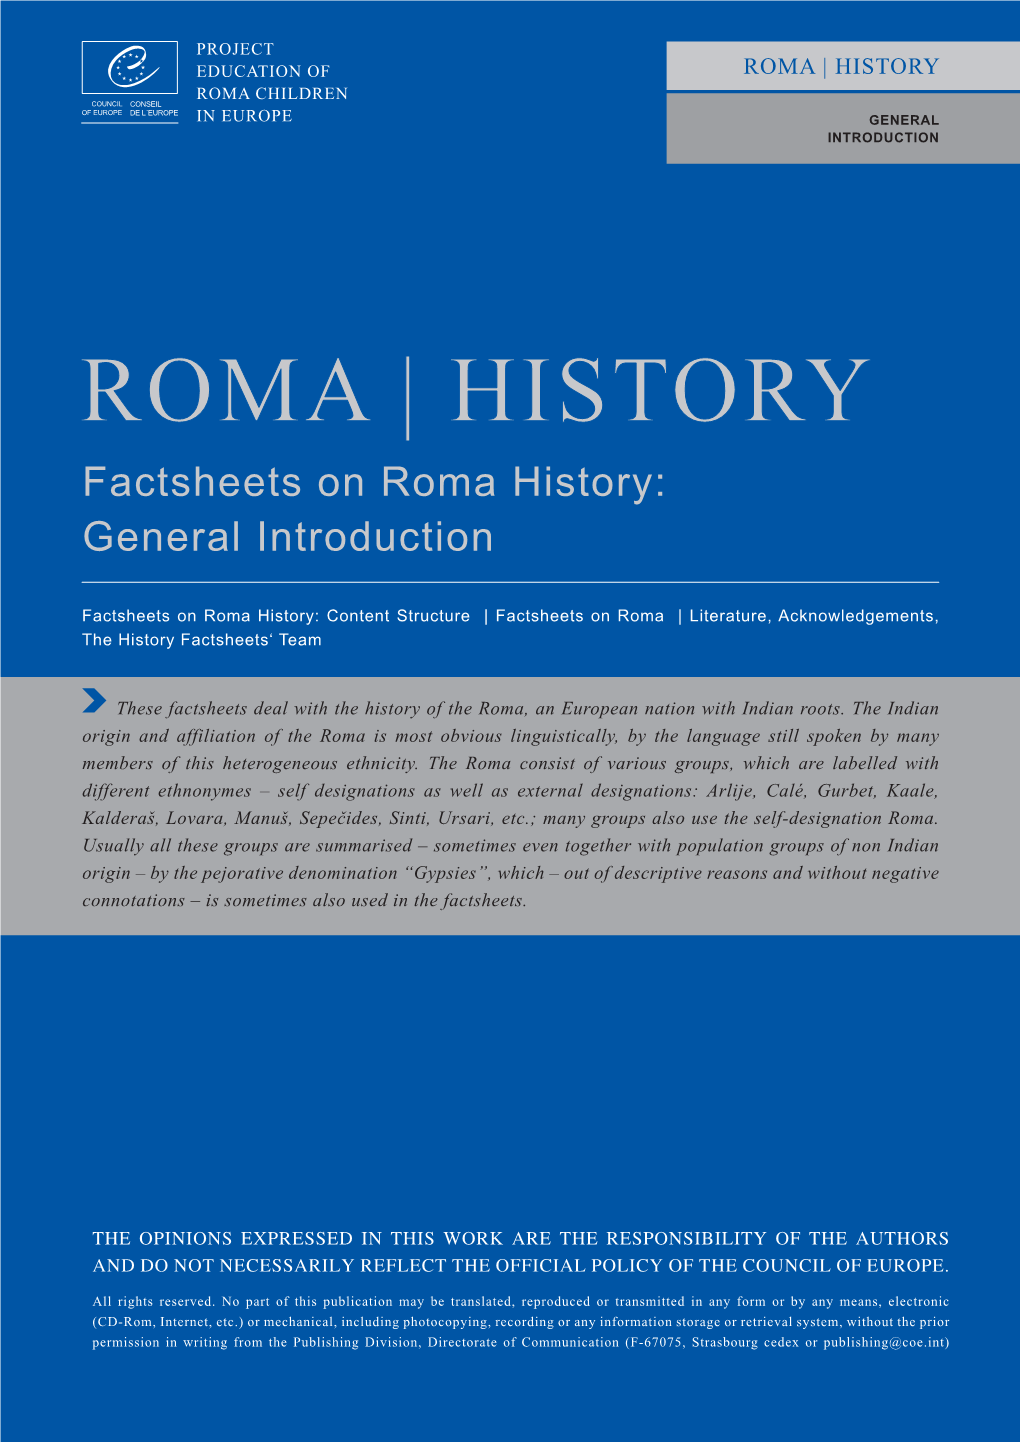 Factsheets on Roma History: General Introduction